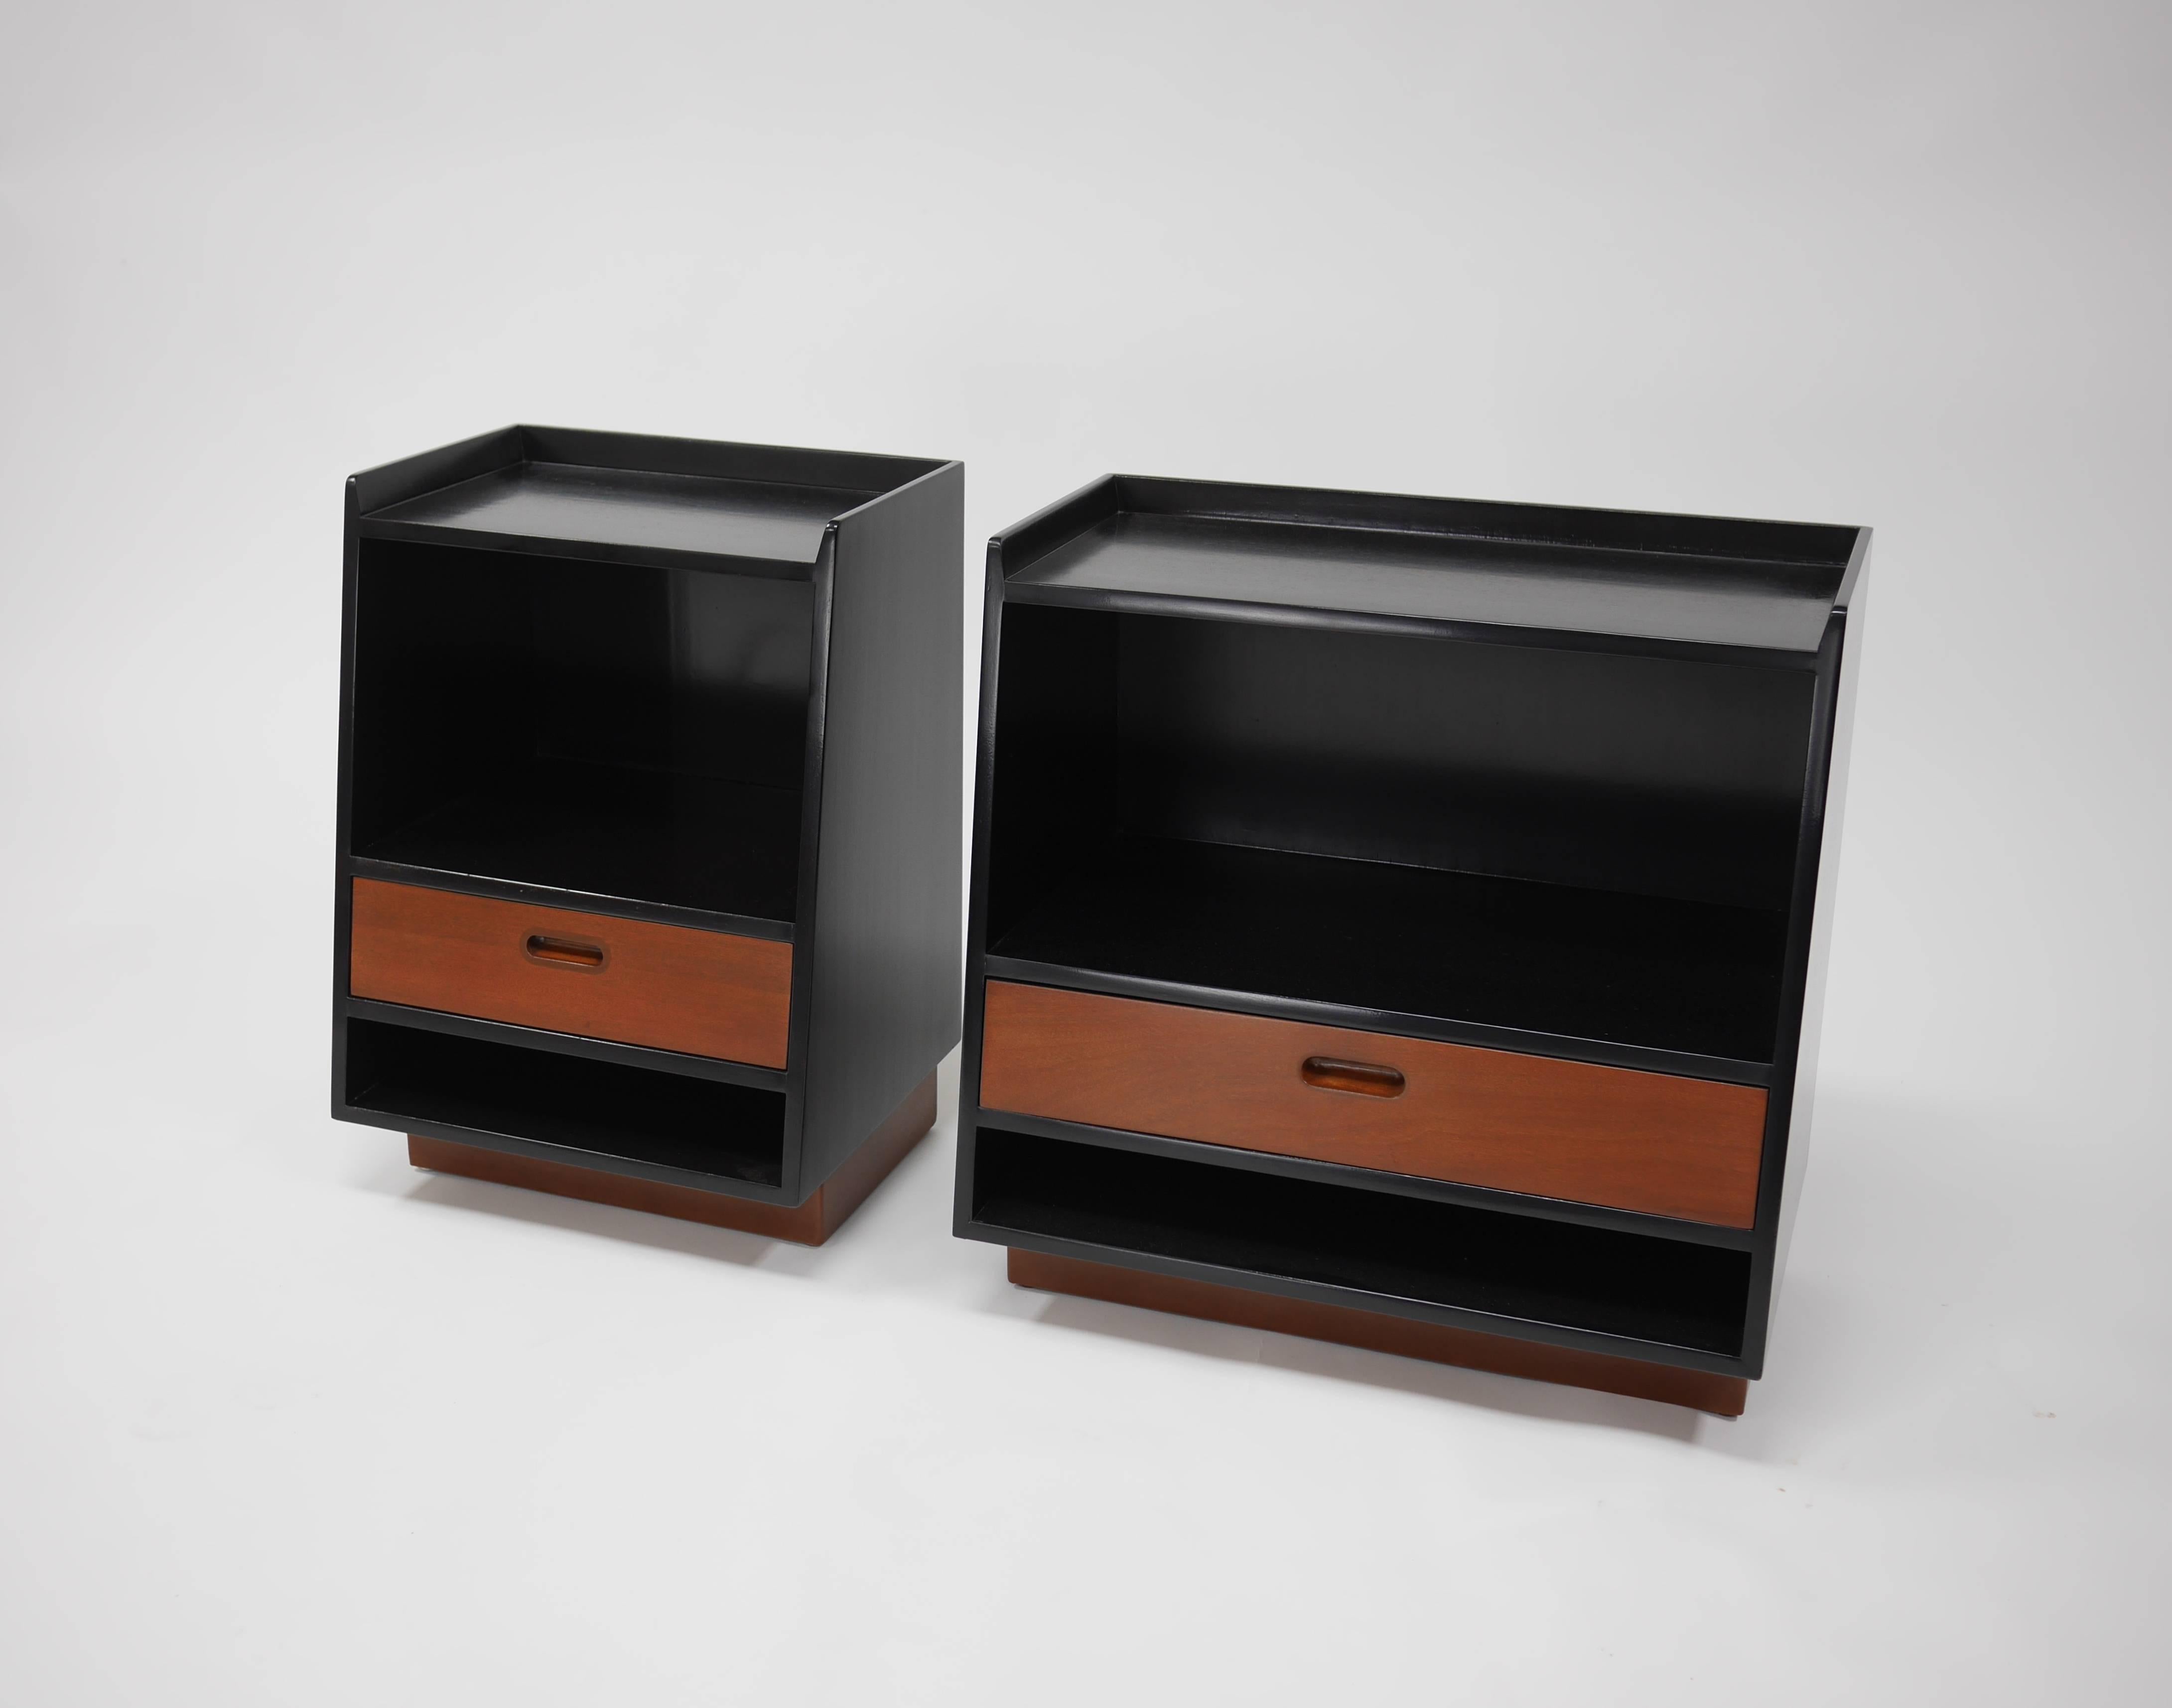 Pair of nightstands by Edward Wormley for Dunbar. Wedge shaped, two tone lacquer, dark walnut cases and lighter drawer fronts. One wider than the other. With leather plinth bases.
Measures:
Wider: 24